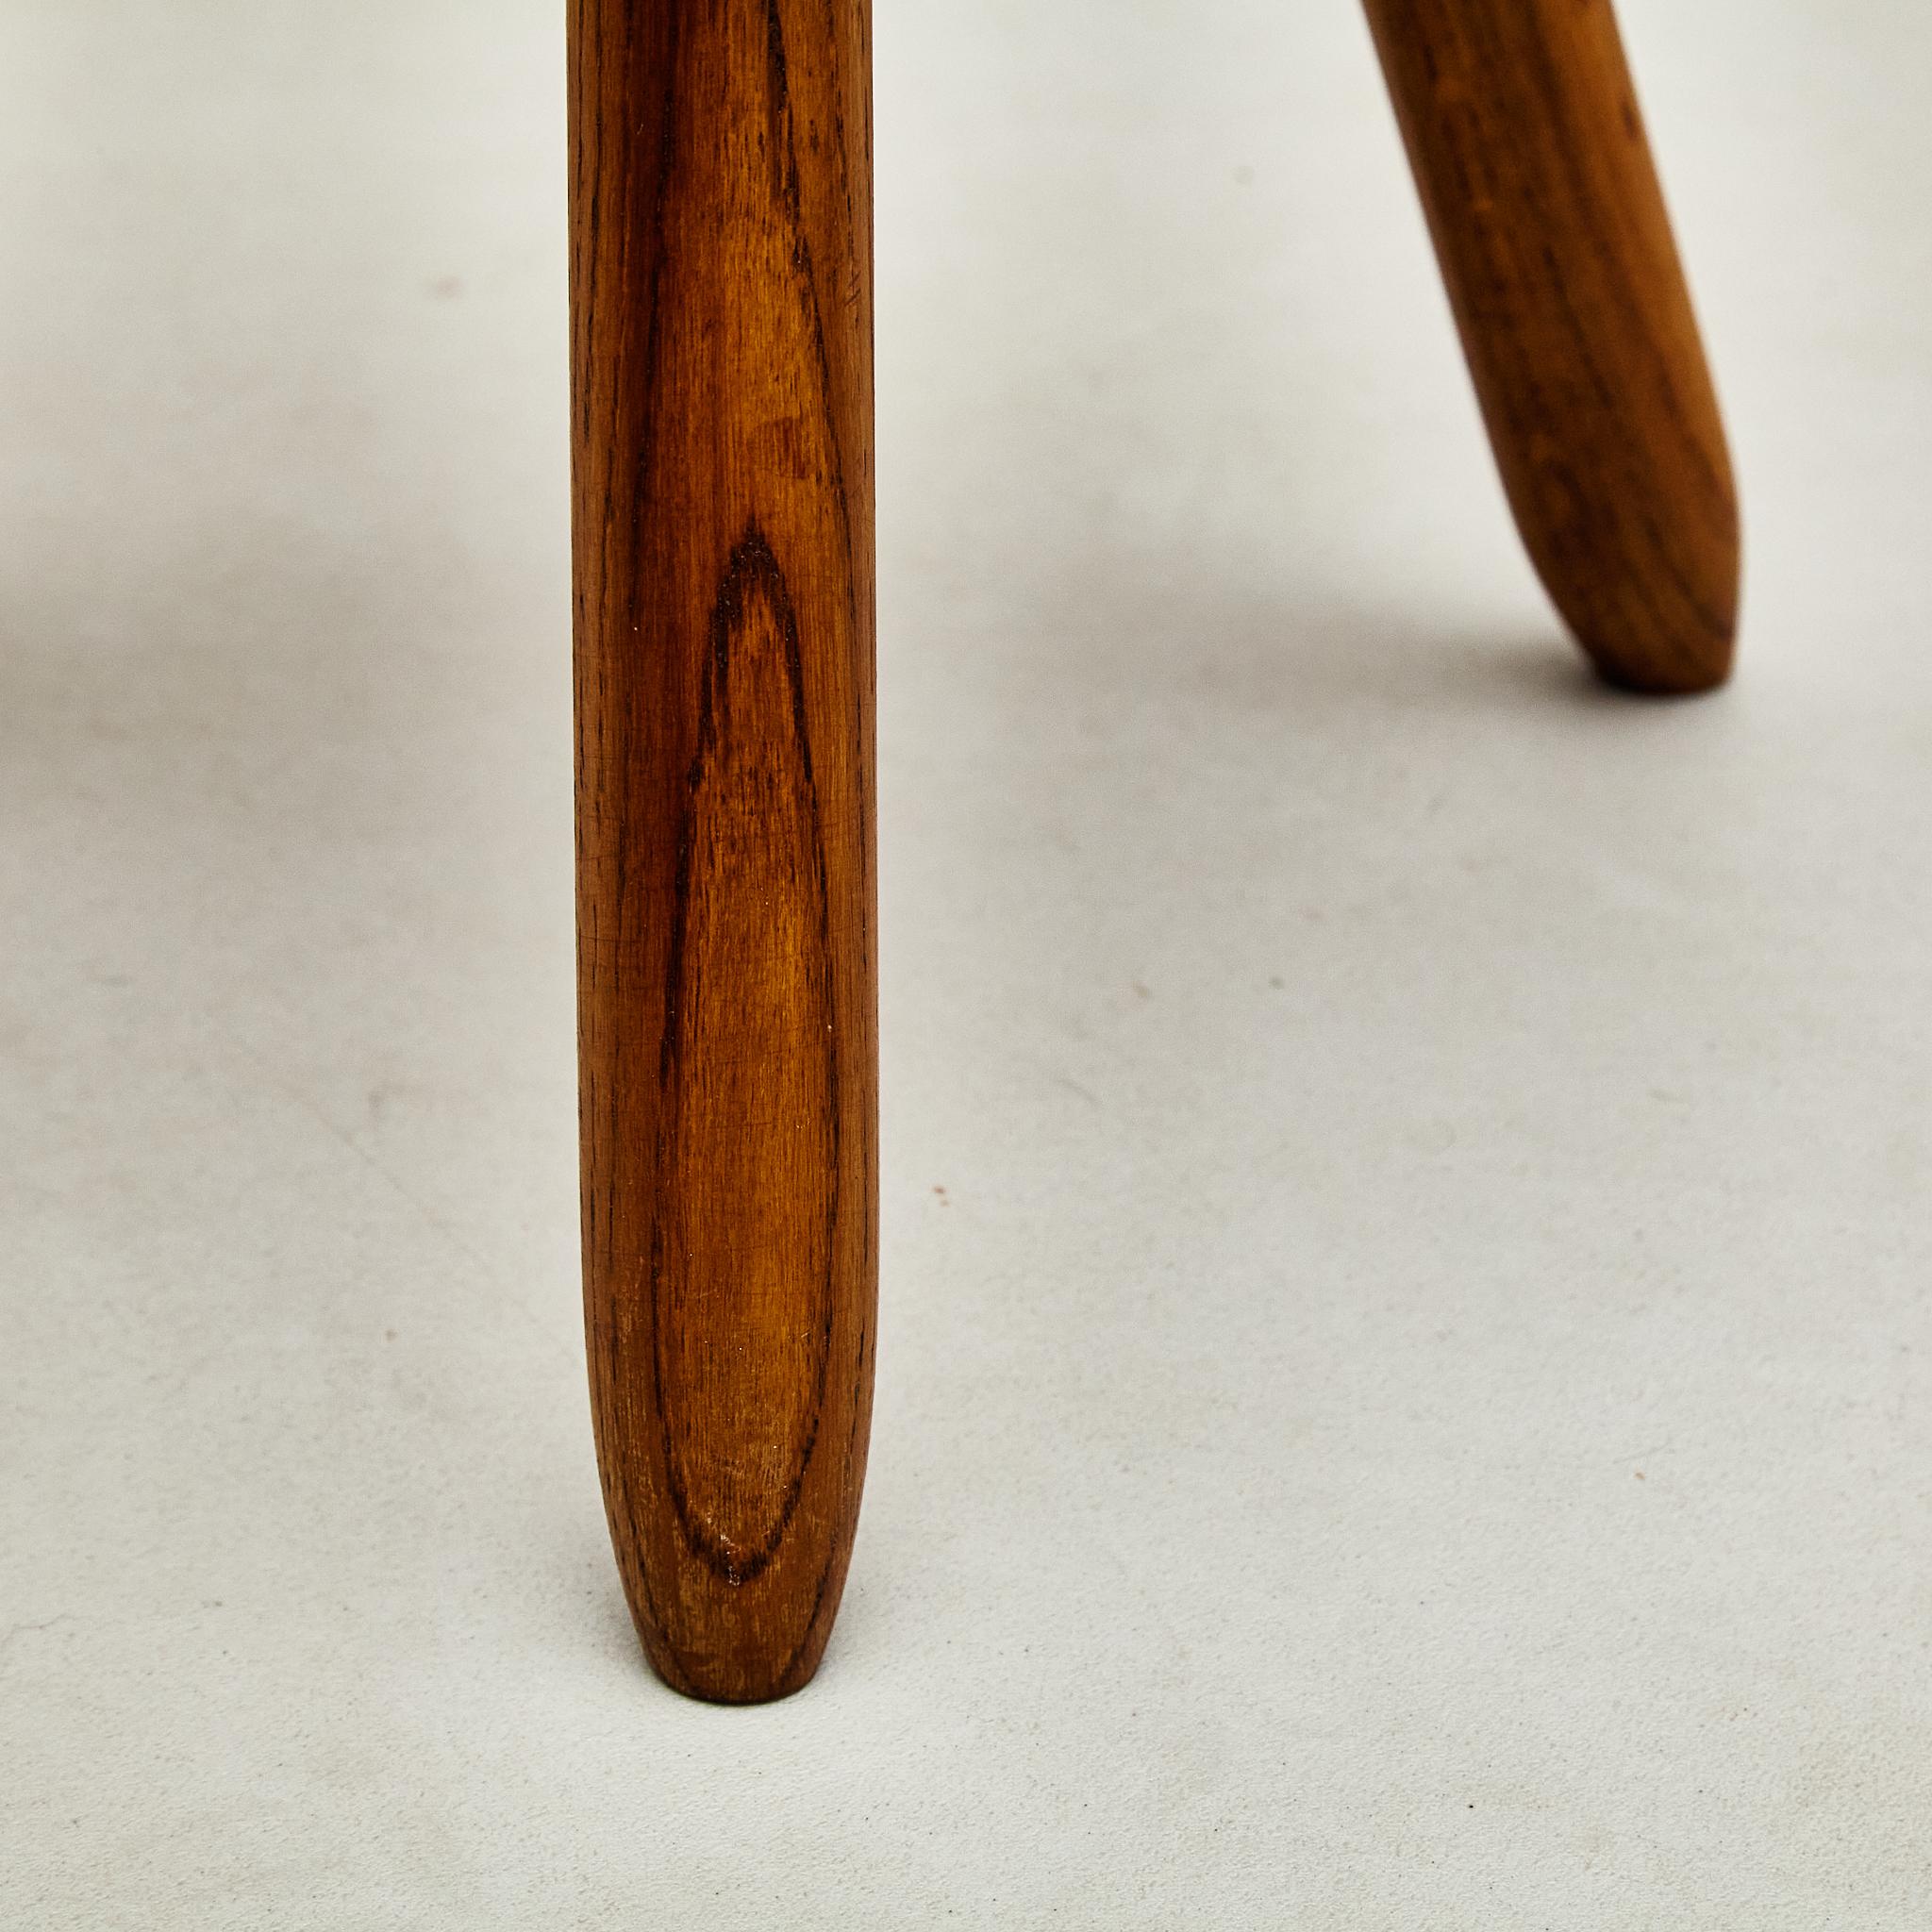 Mid-Century Modern Wood Tripod Stool in the Style of Charlotte Perriand For Sale 3